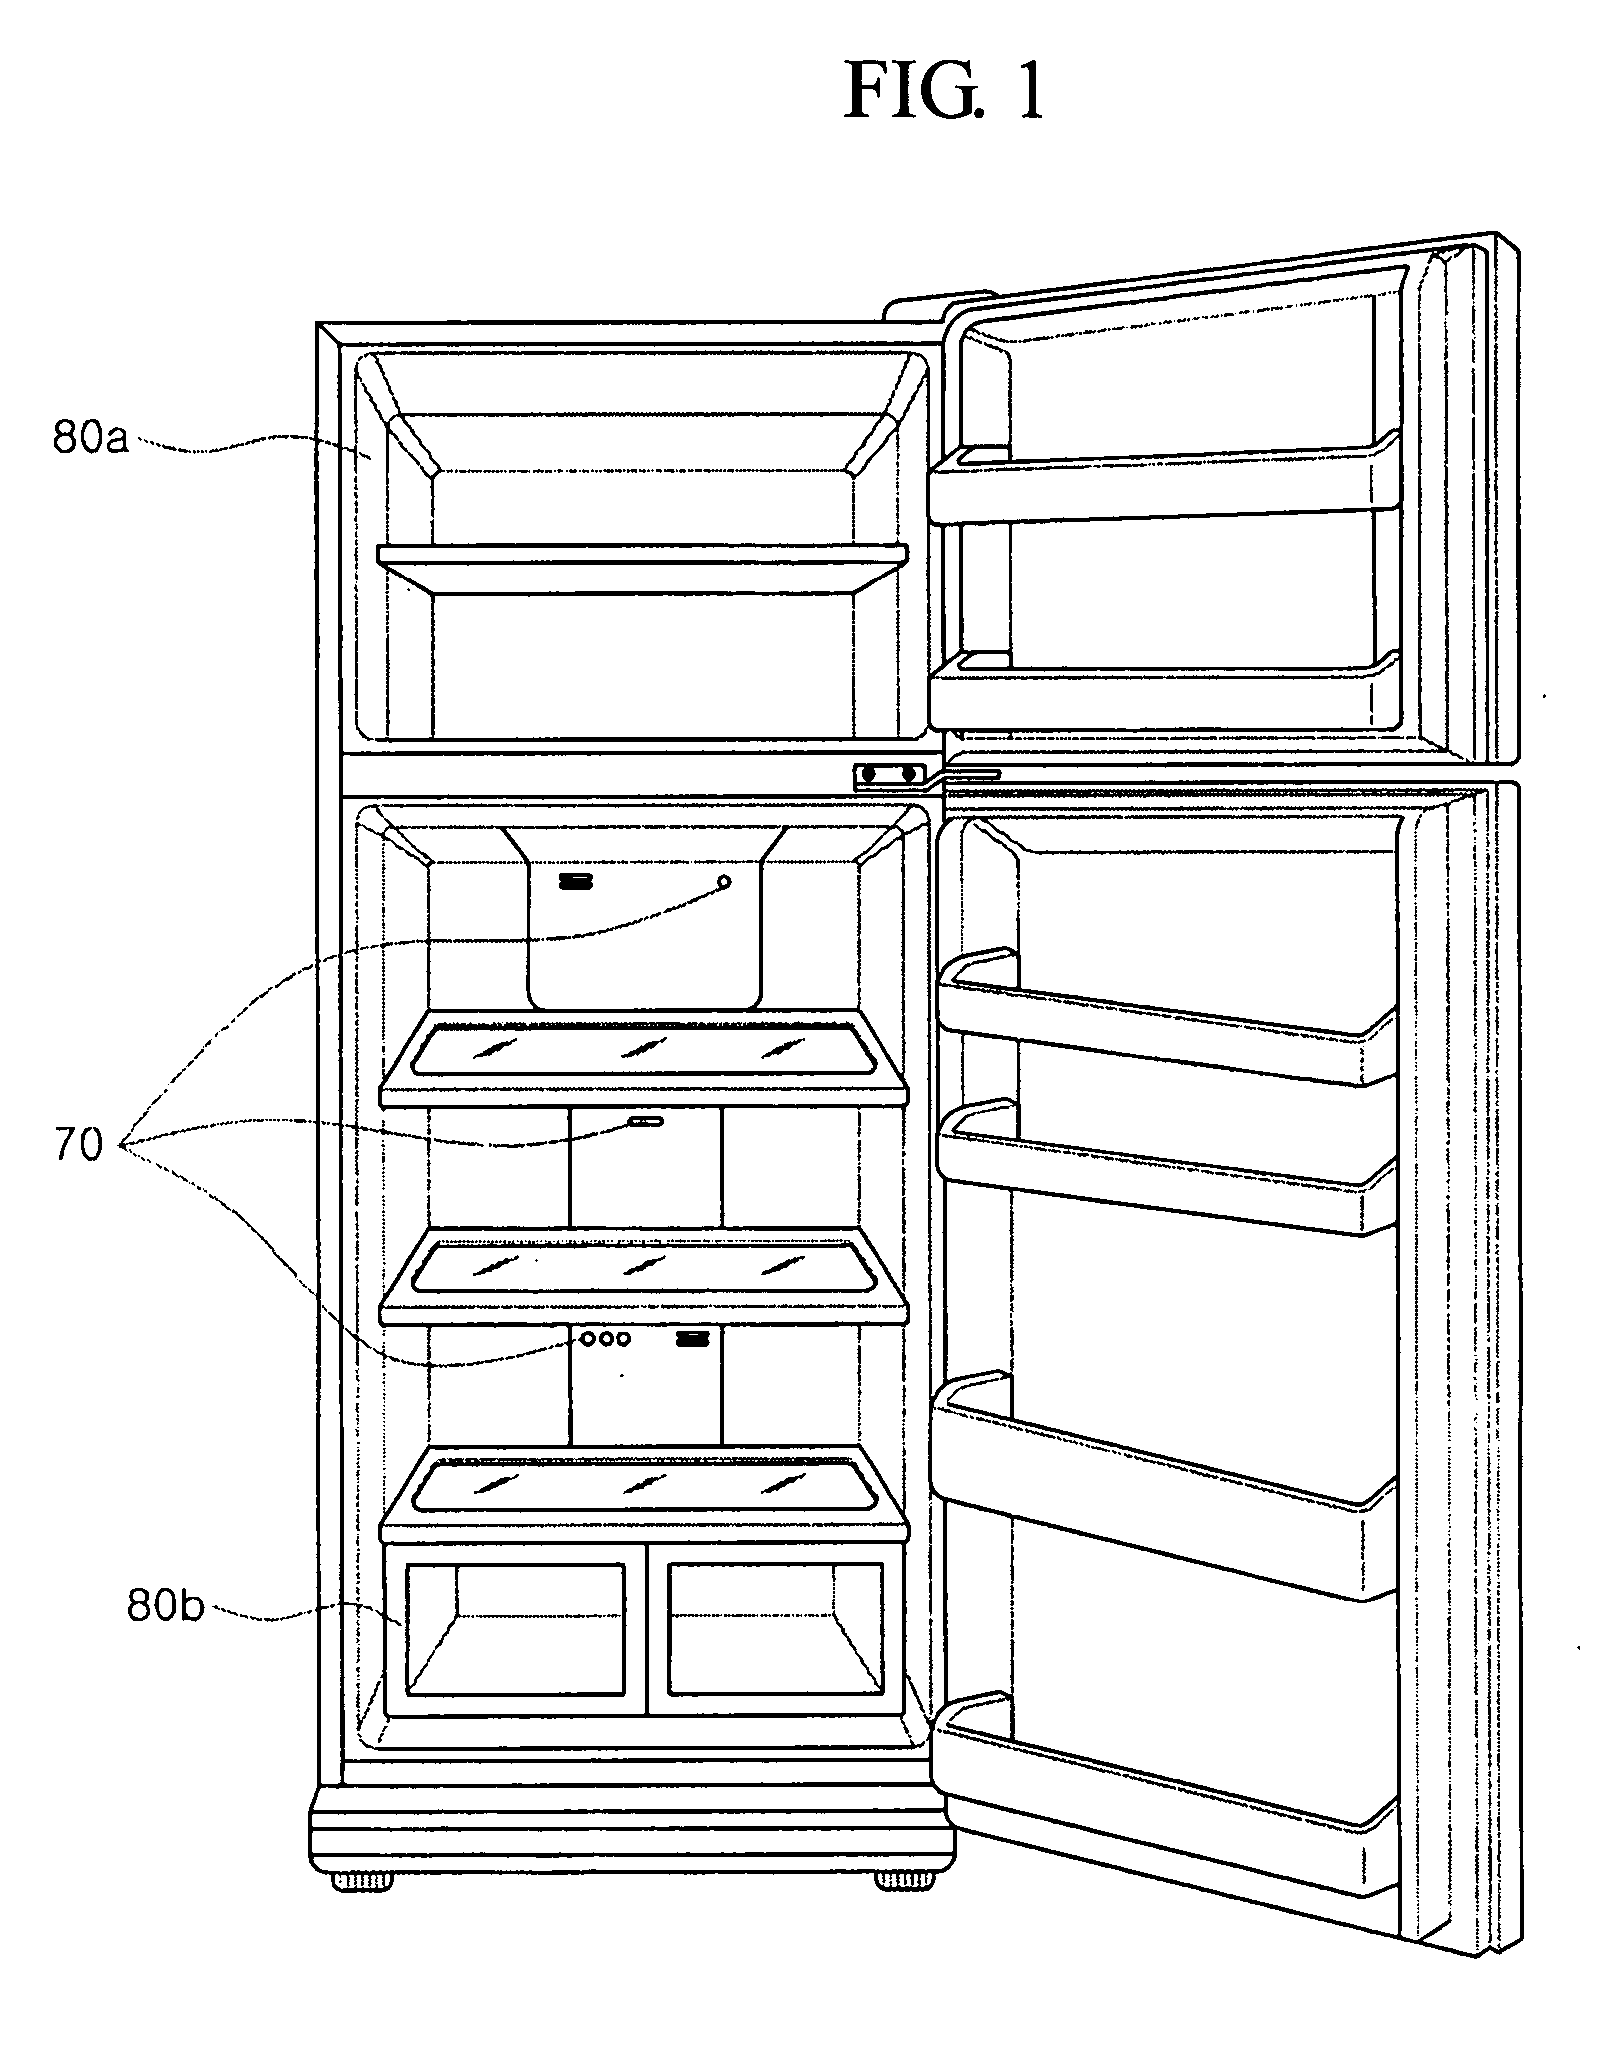 Apparatus and method for controlling fan of refrigerator with television/radio module